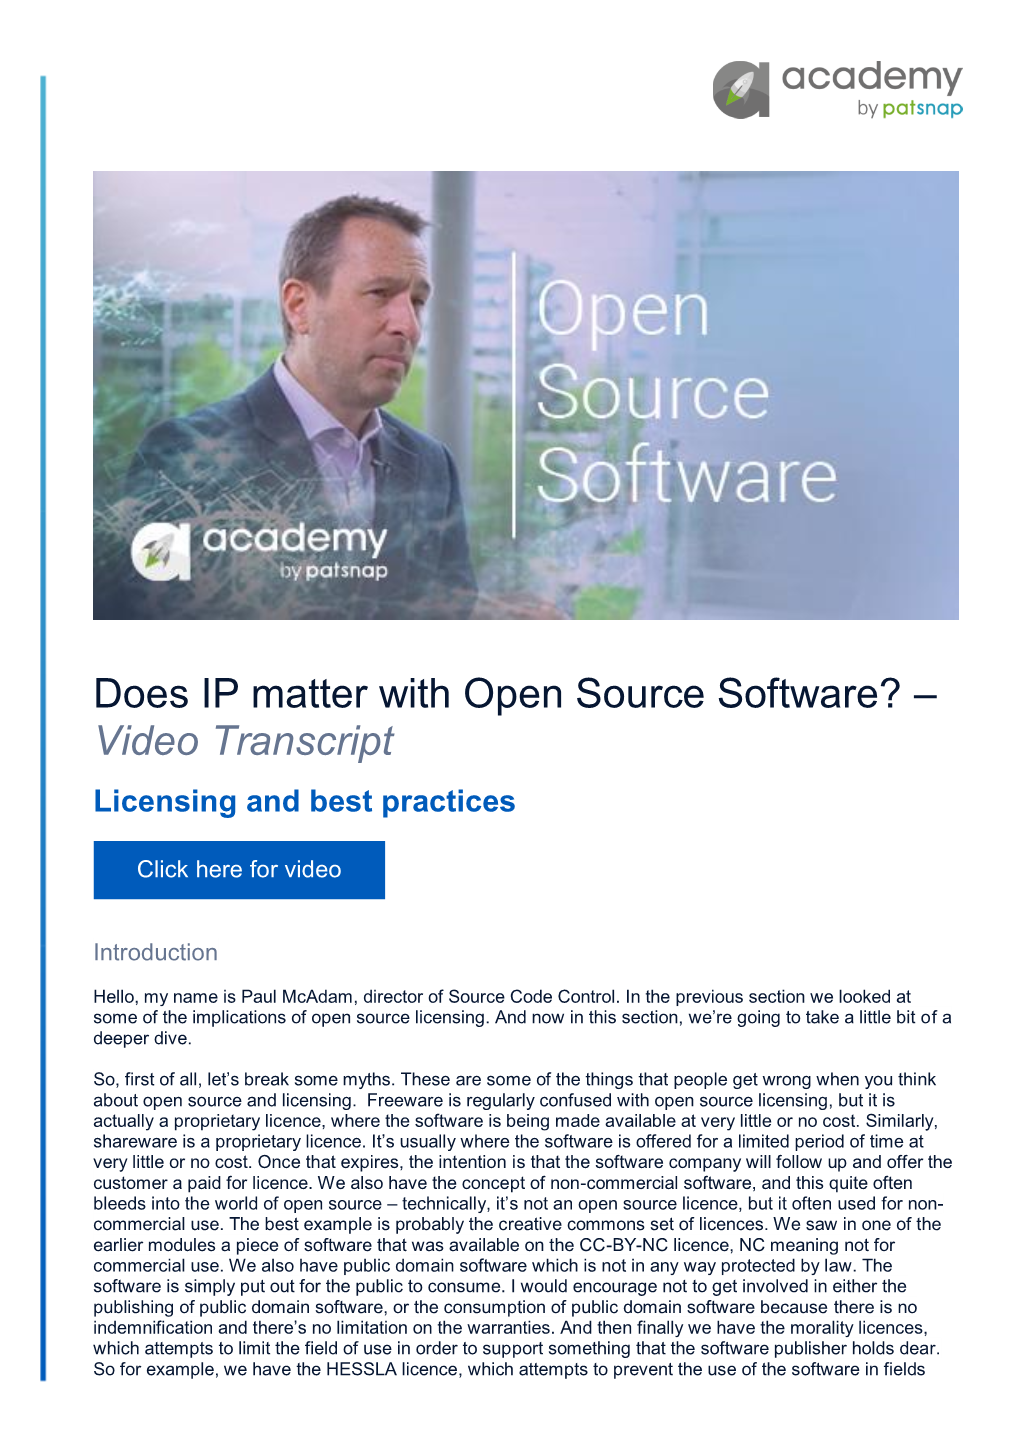 Does IP Matter with Open Source Software? – Video Transcript